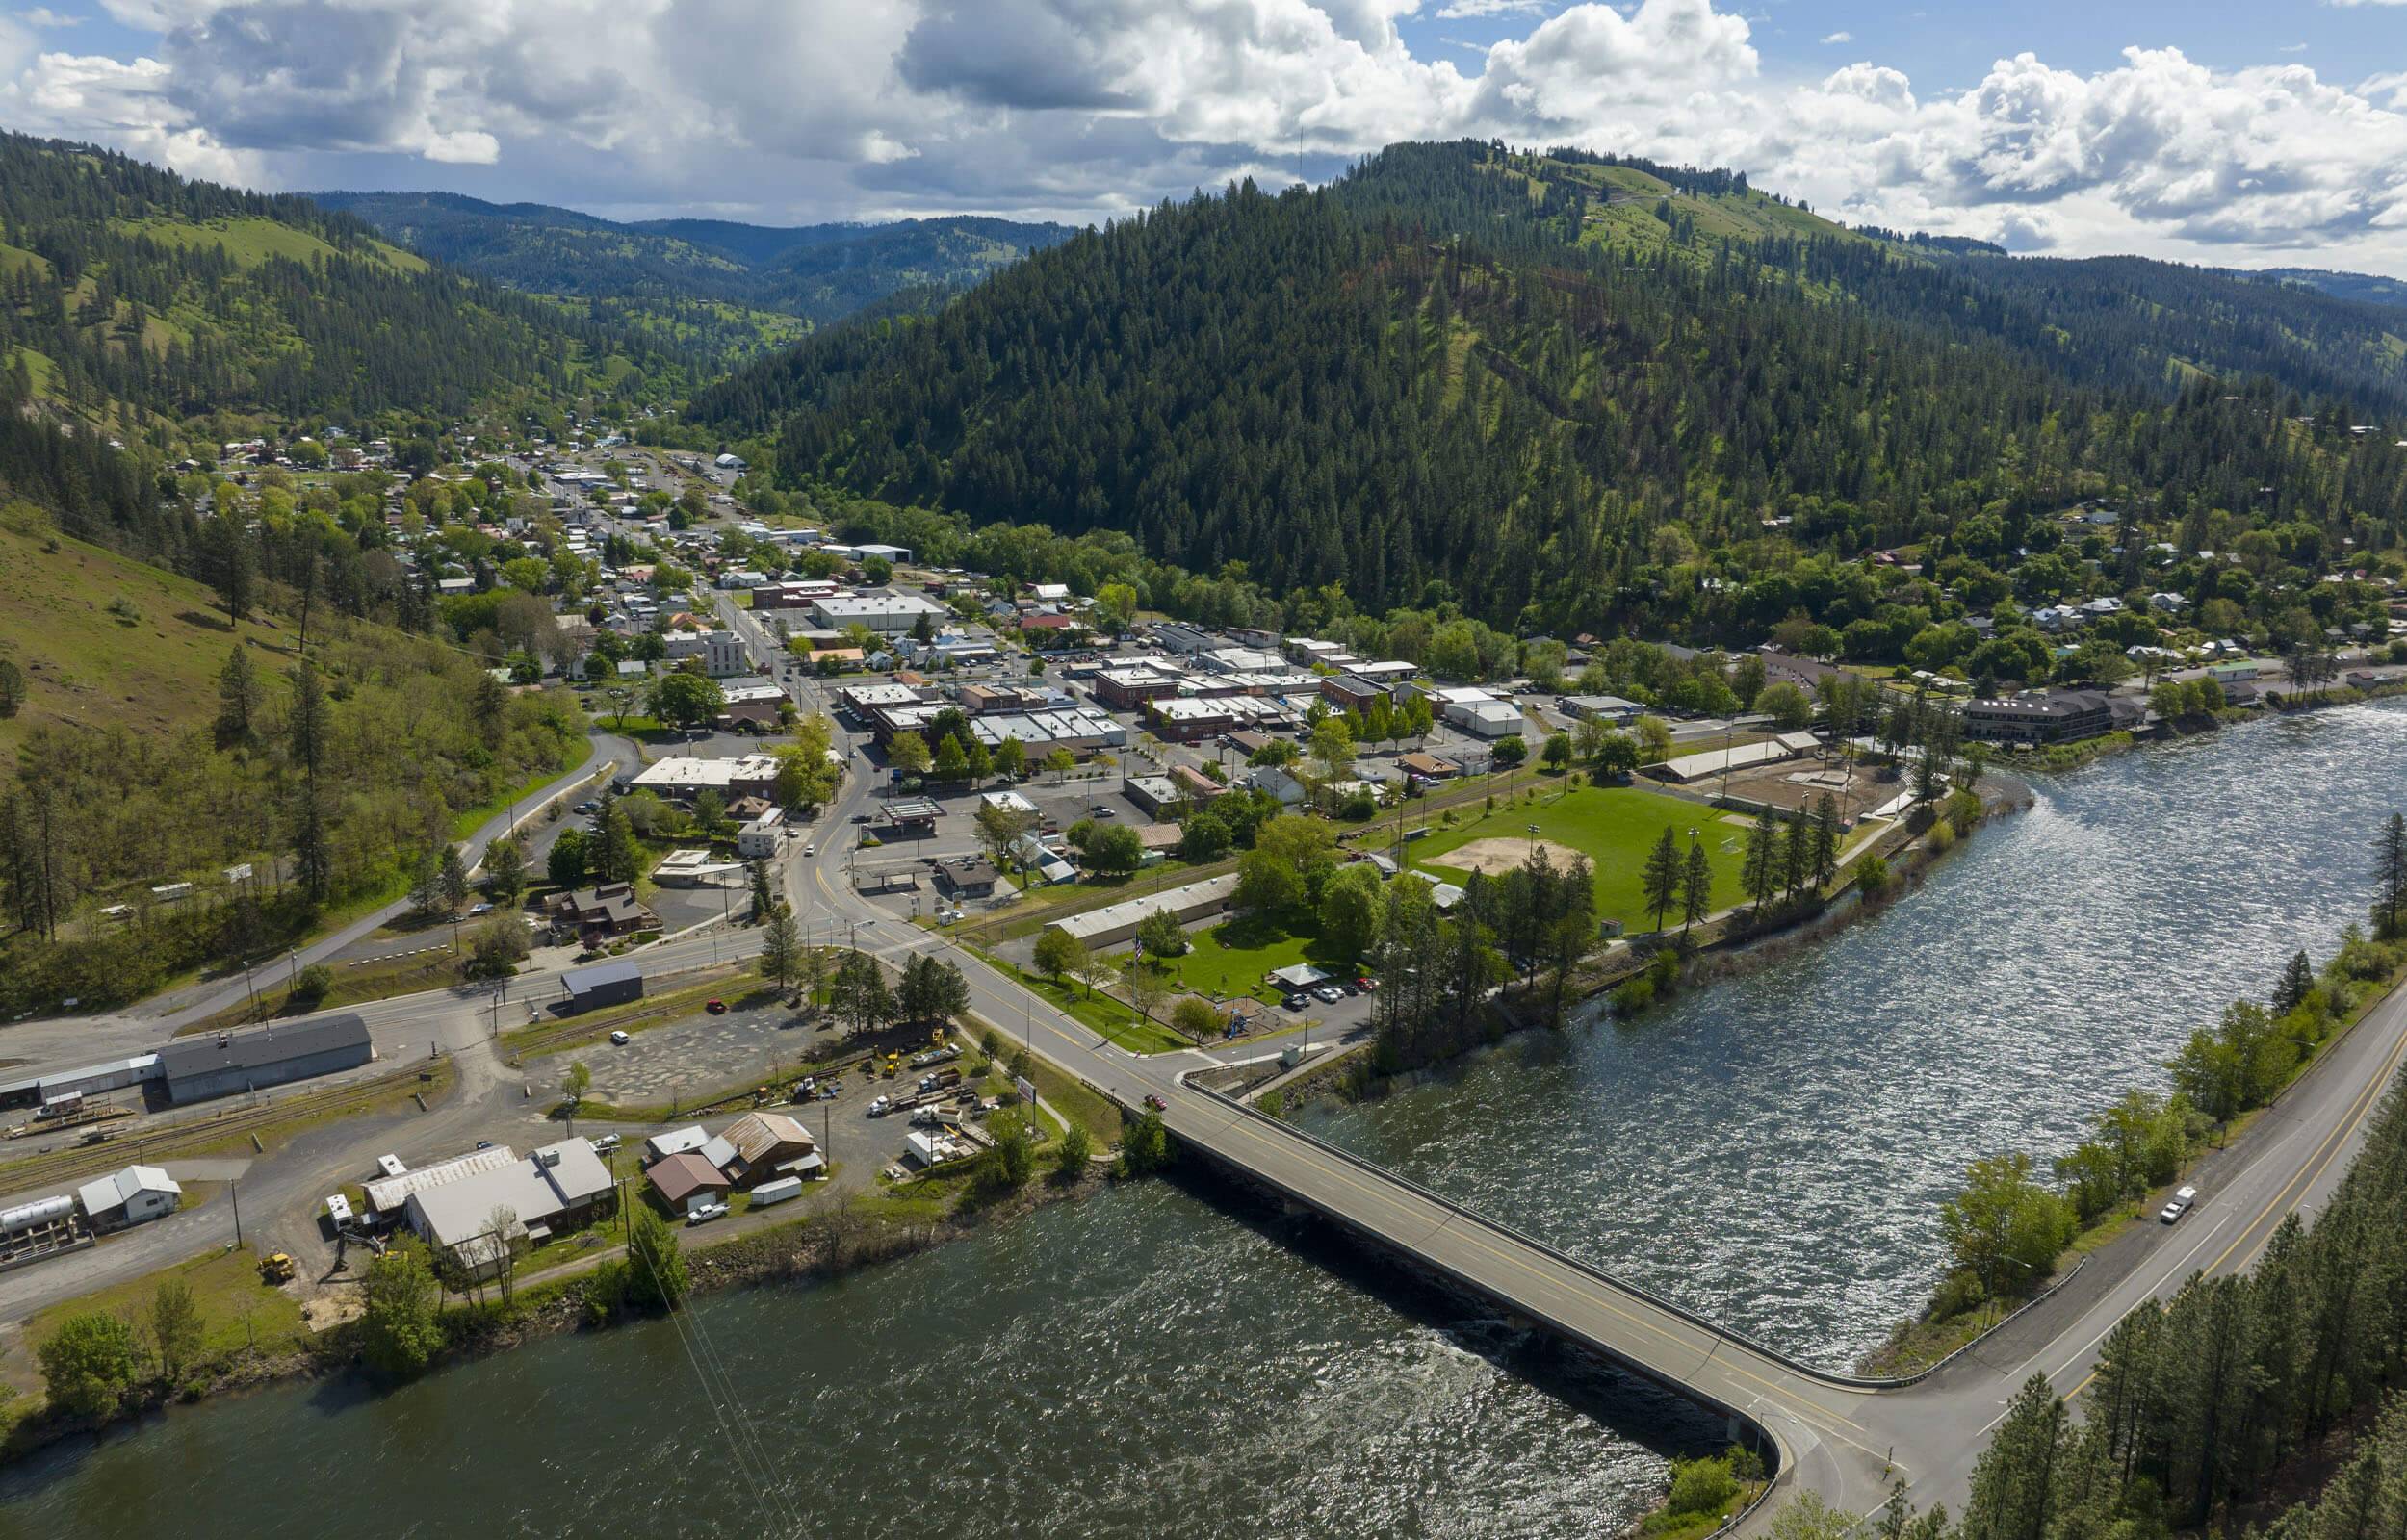 An aerial shot of the town of Orofino on the Clearwater River.